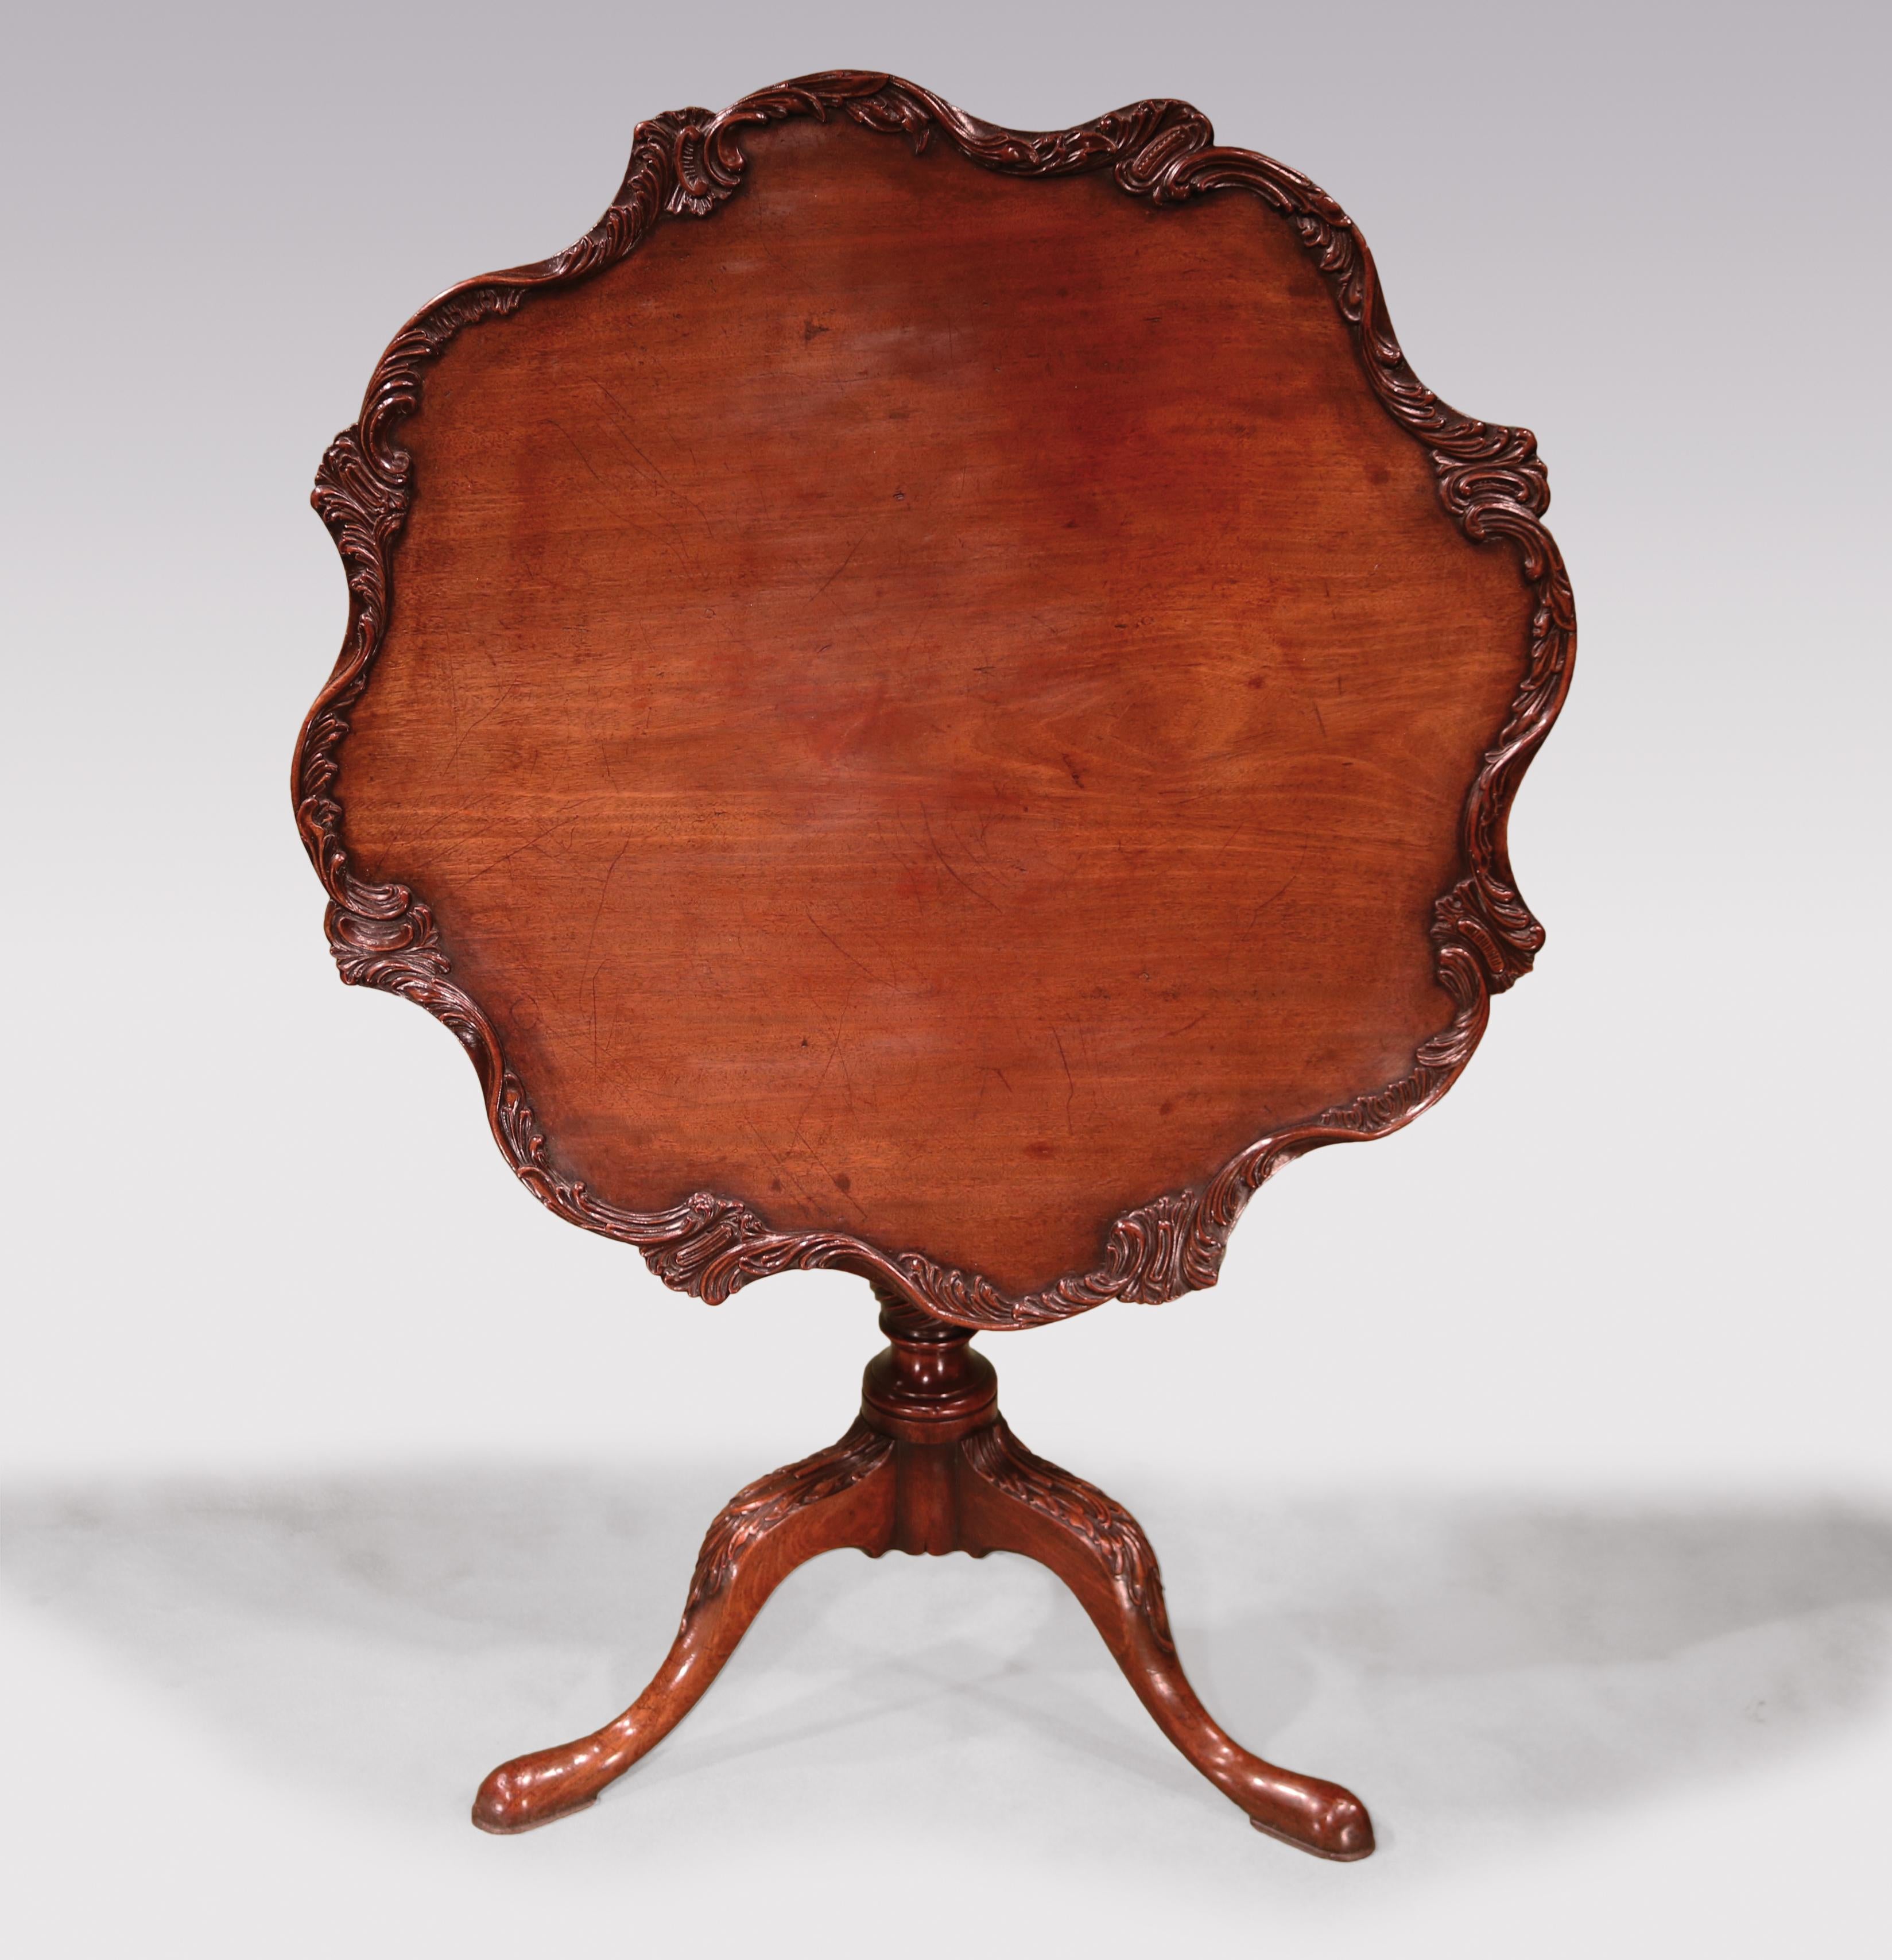 A fine and rare mid-18th century Chippendale period mahogany Tripod Table, having 8 differing rococo carved edge sections, supported on fluted spiral twist stem ending on acanthus carved legs with pad feet. (Block repositioned).